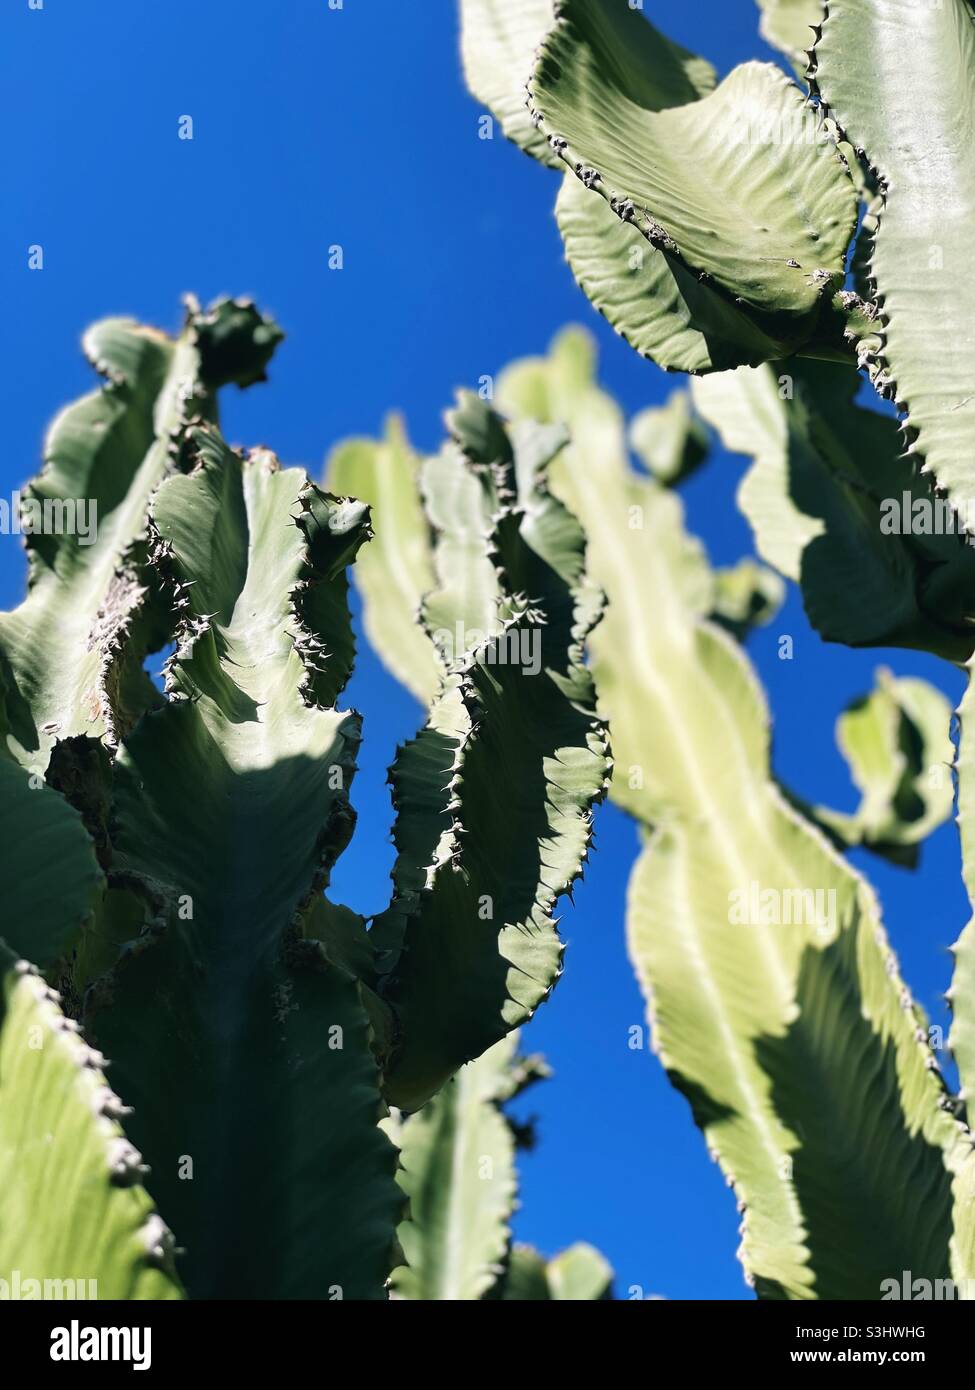 Cactus plant in a clear blue sky Stock Photo